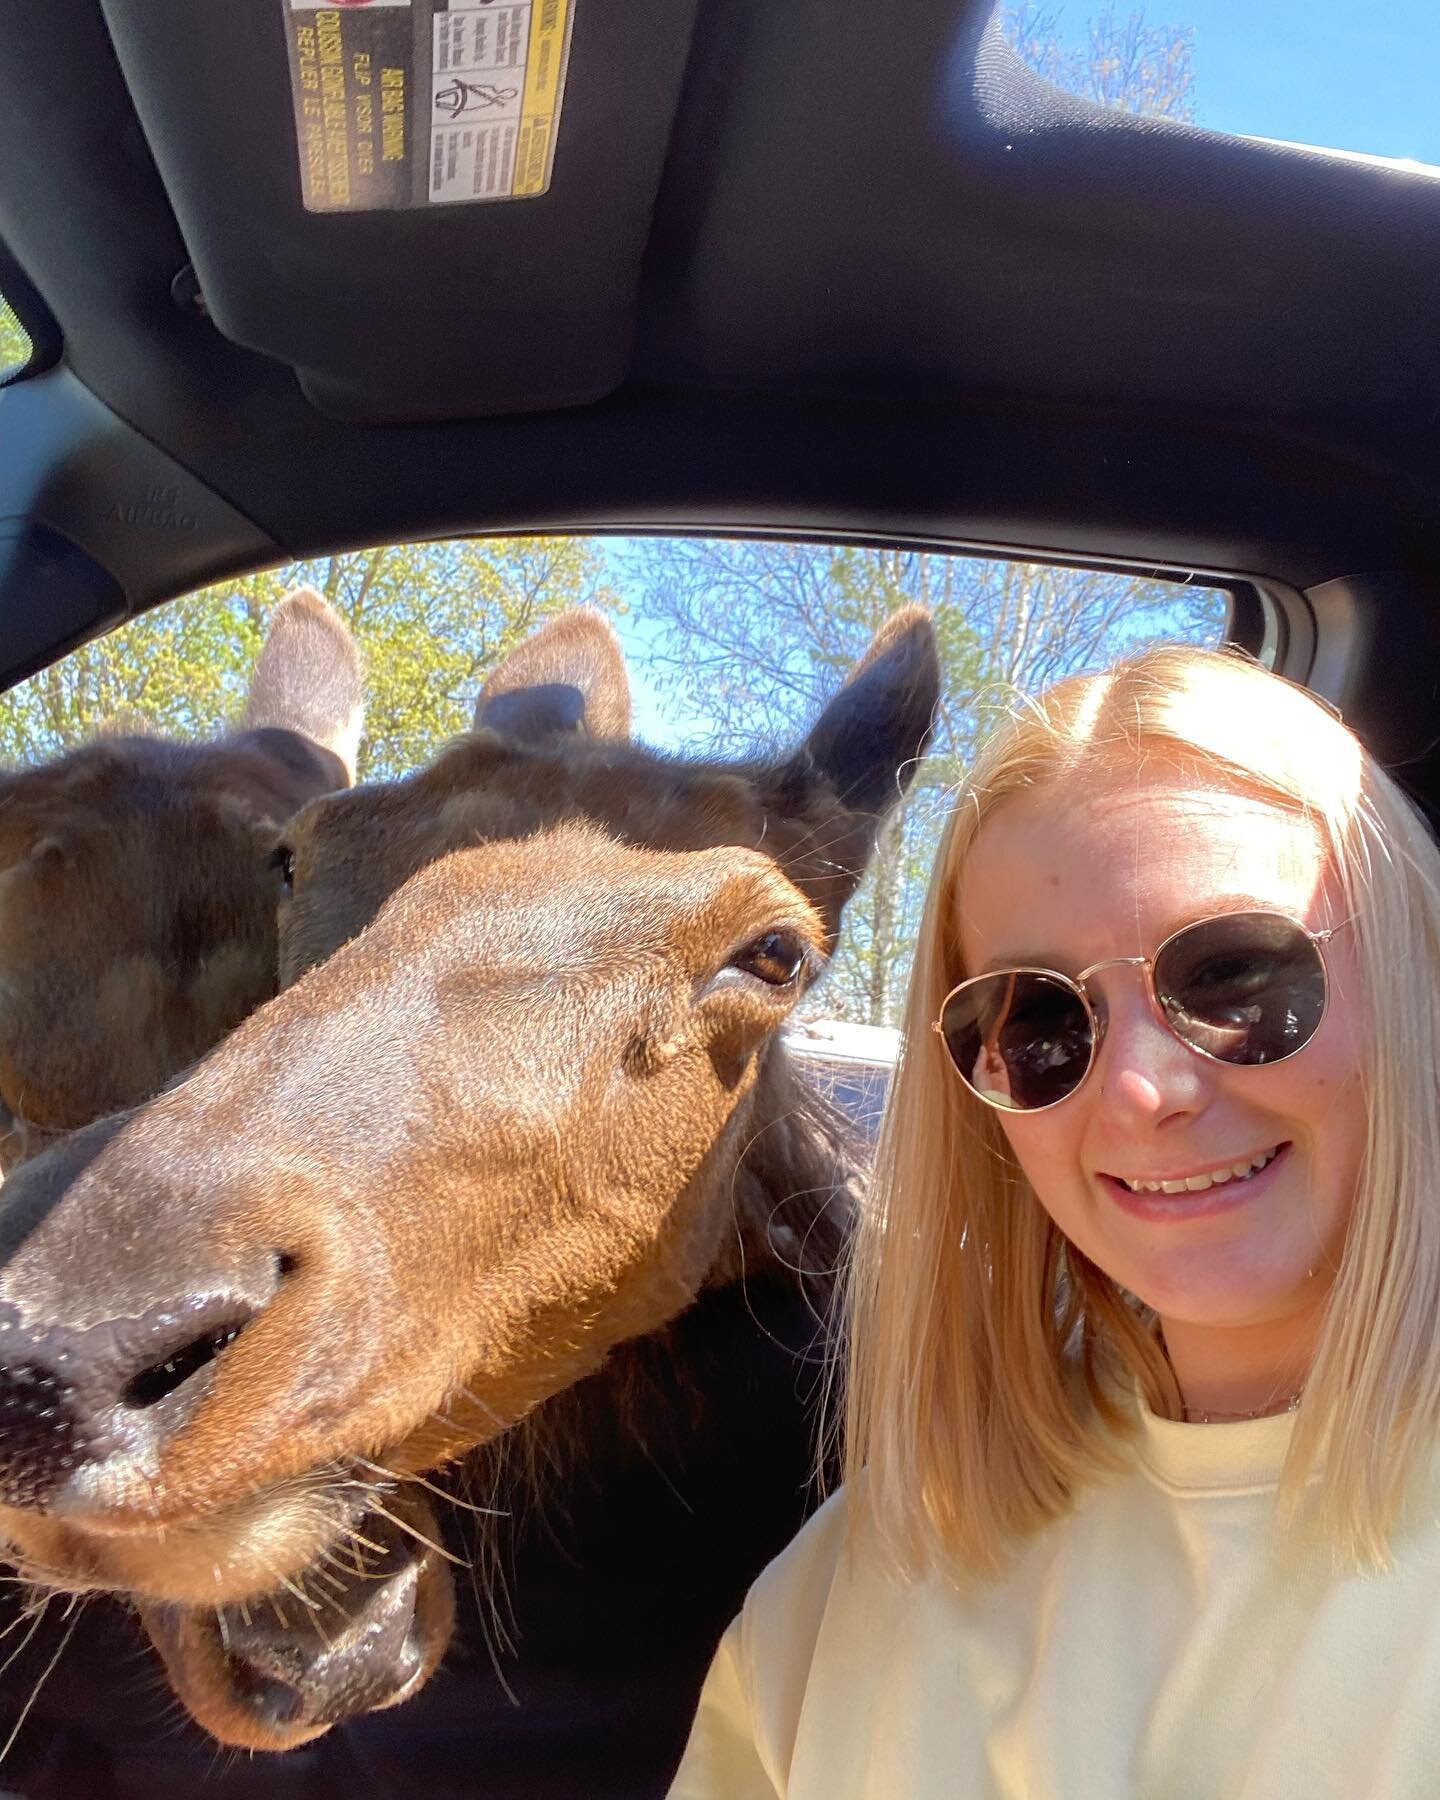 Made some new friends today🌳🦌